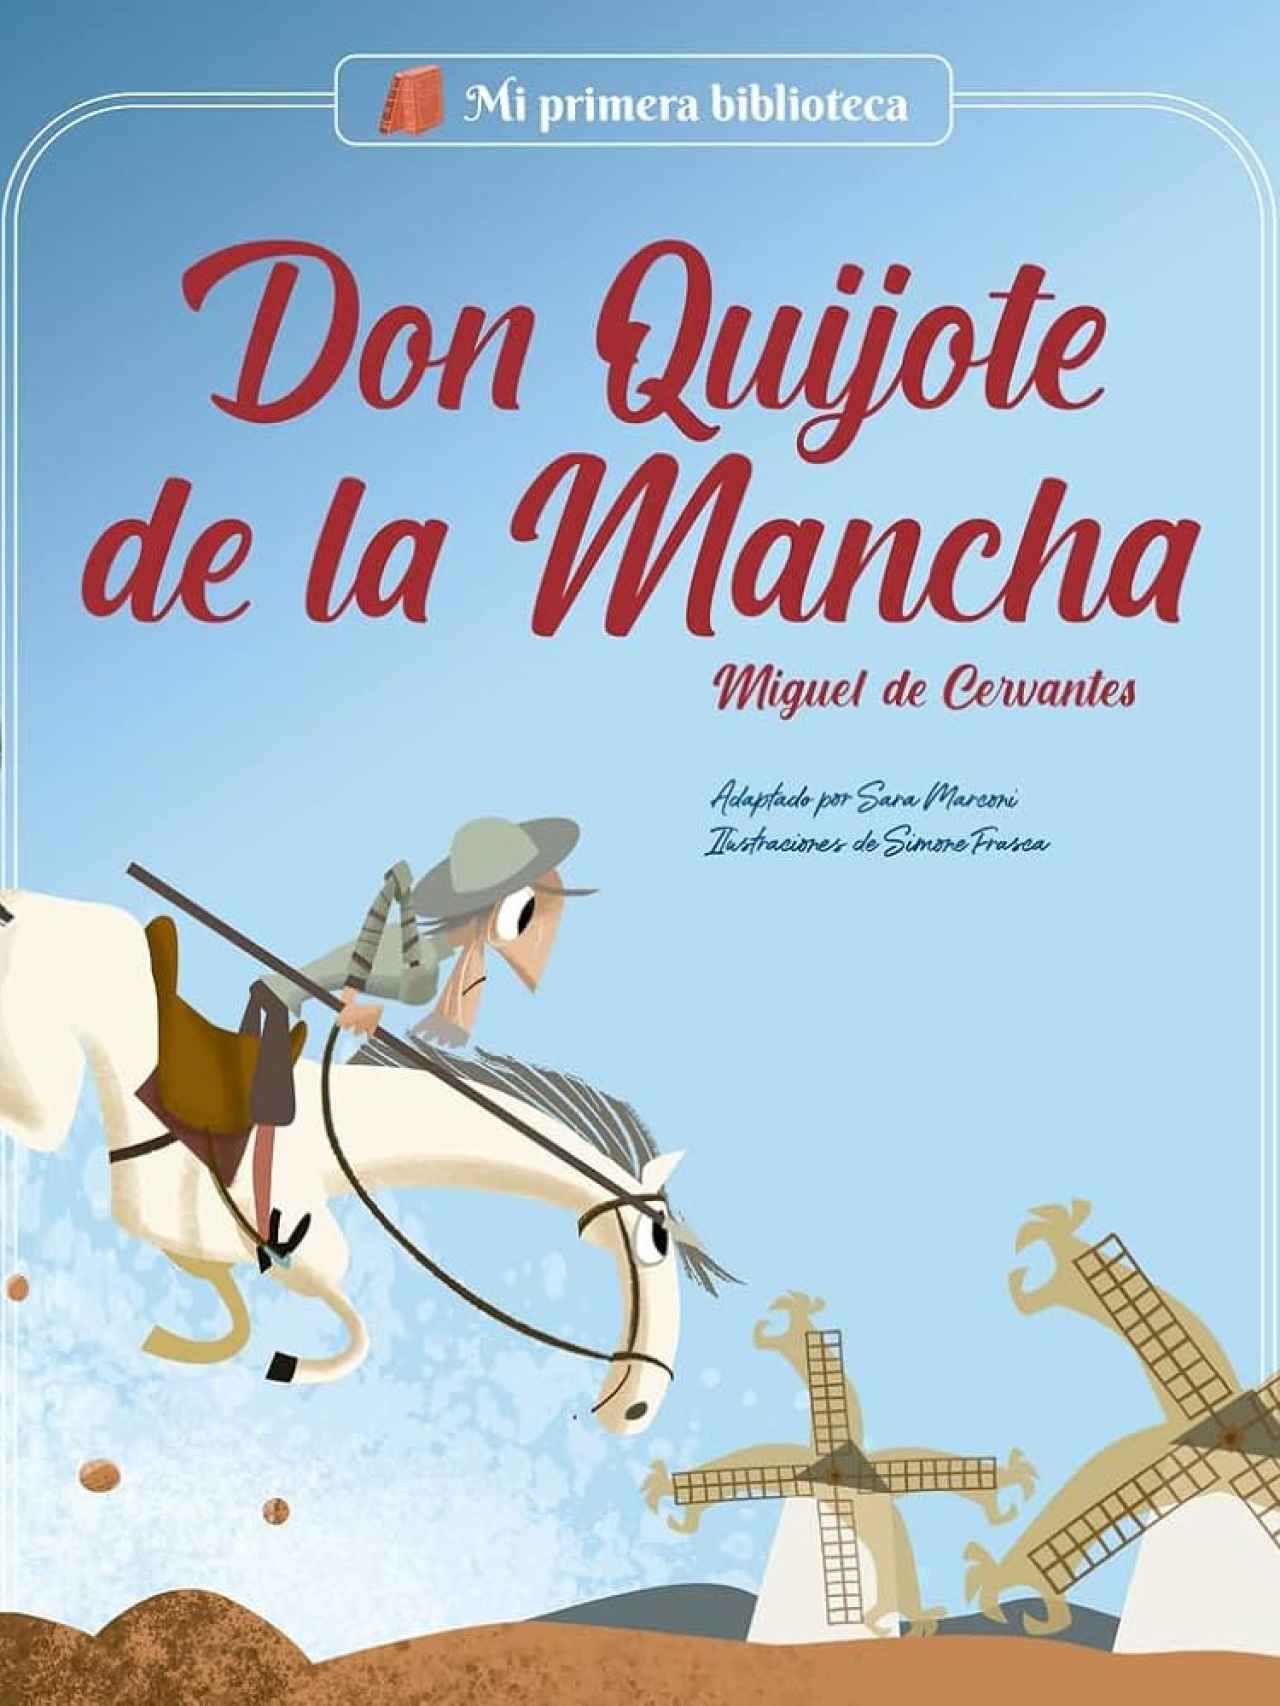 'Don Quijote'